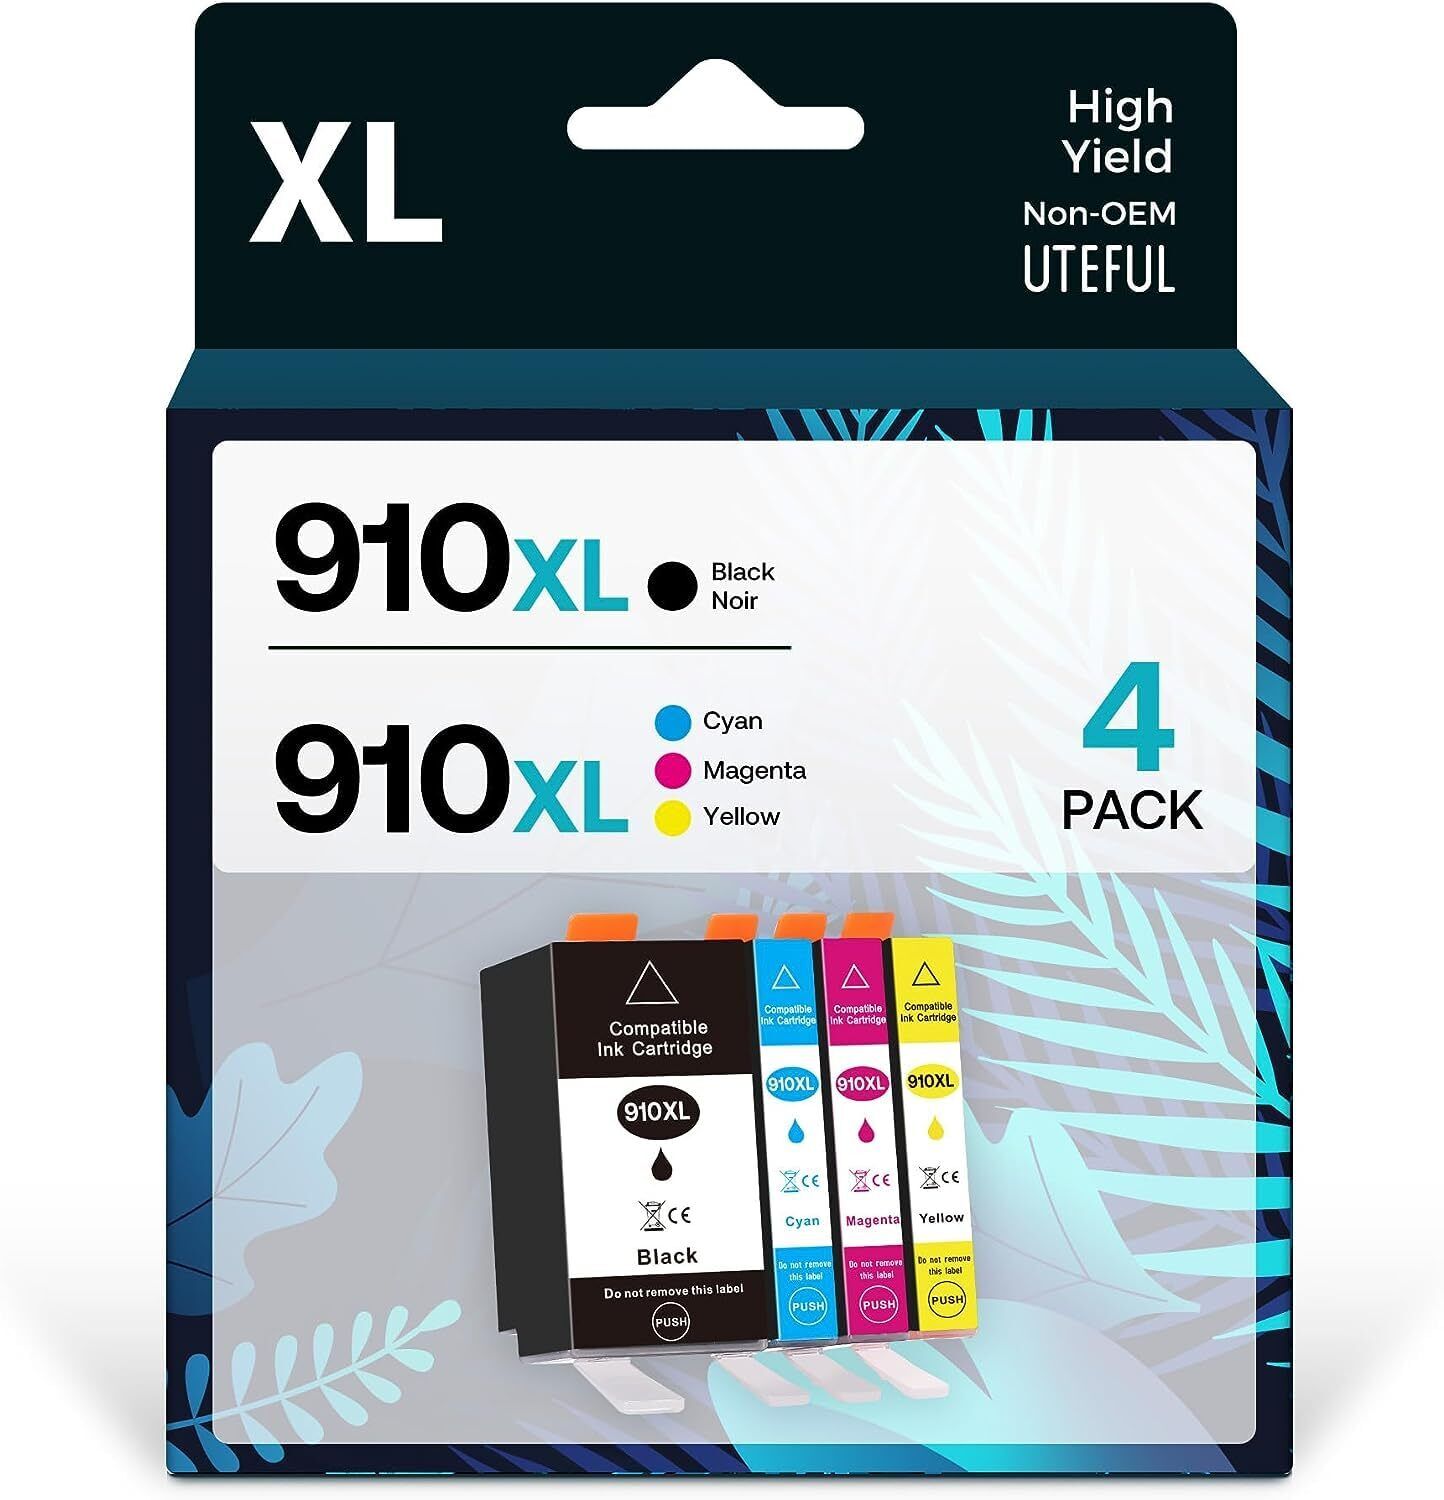 UTEFUL 910XL Ink Cartridges Combo Pack Compatible for HP 910 XL Work with HP ...